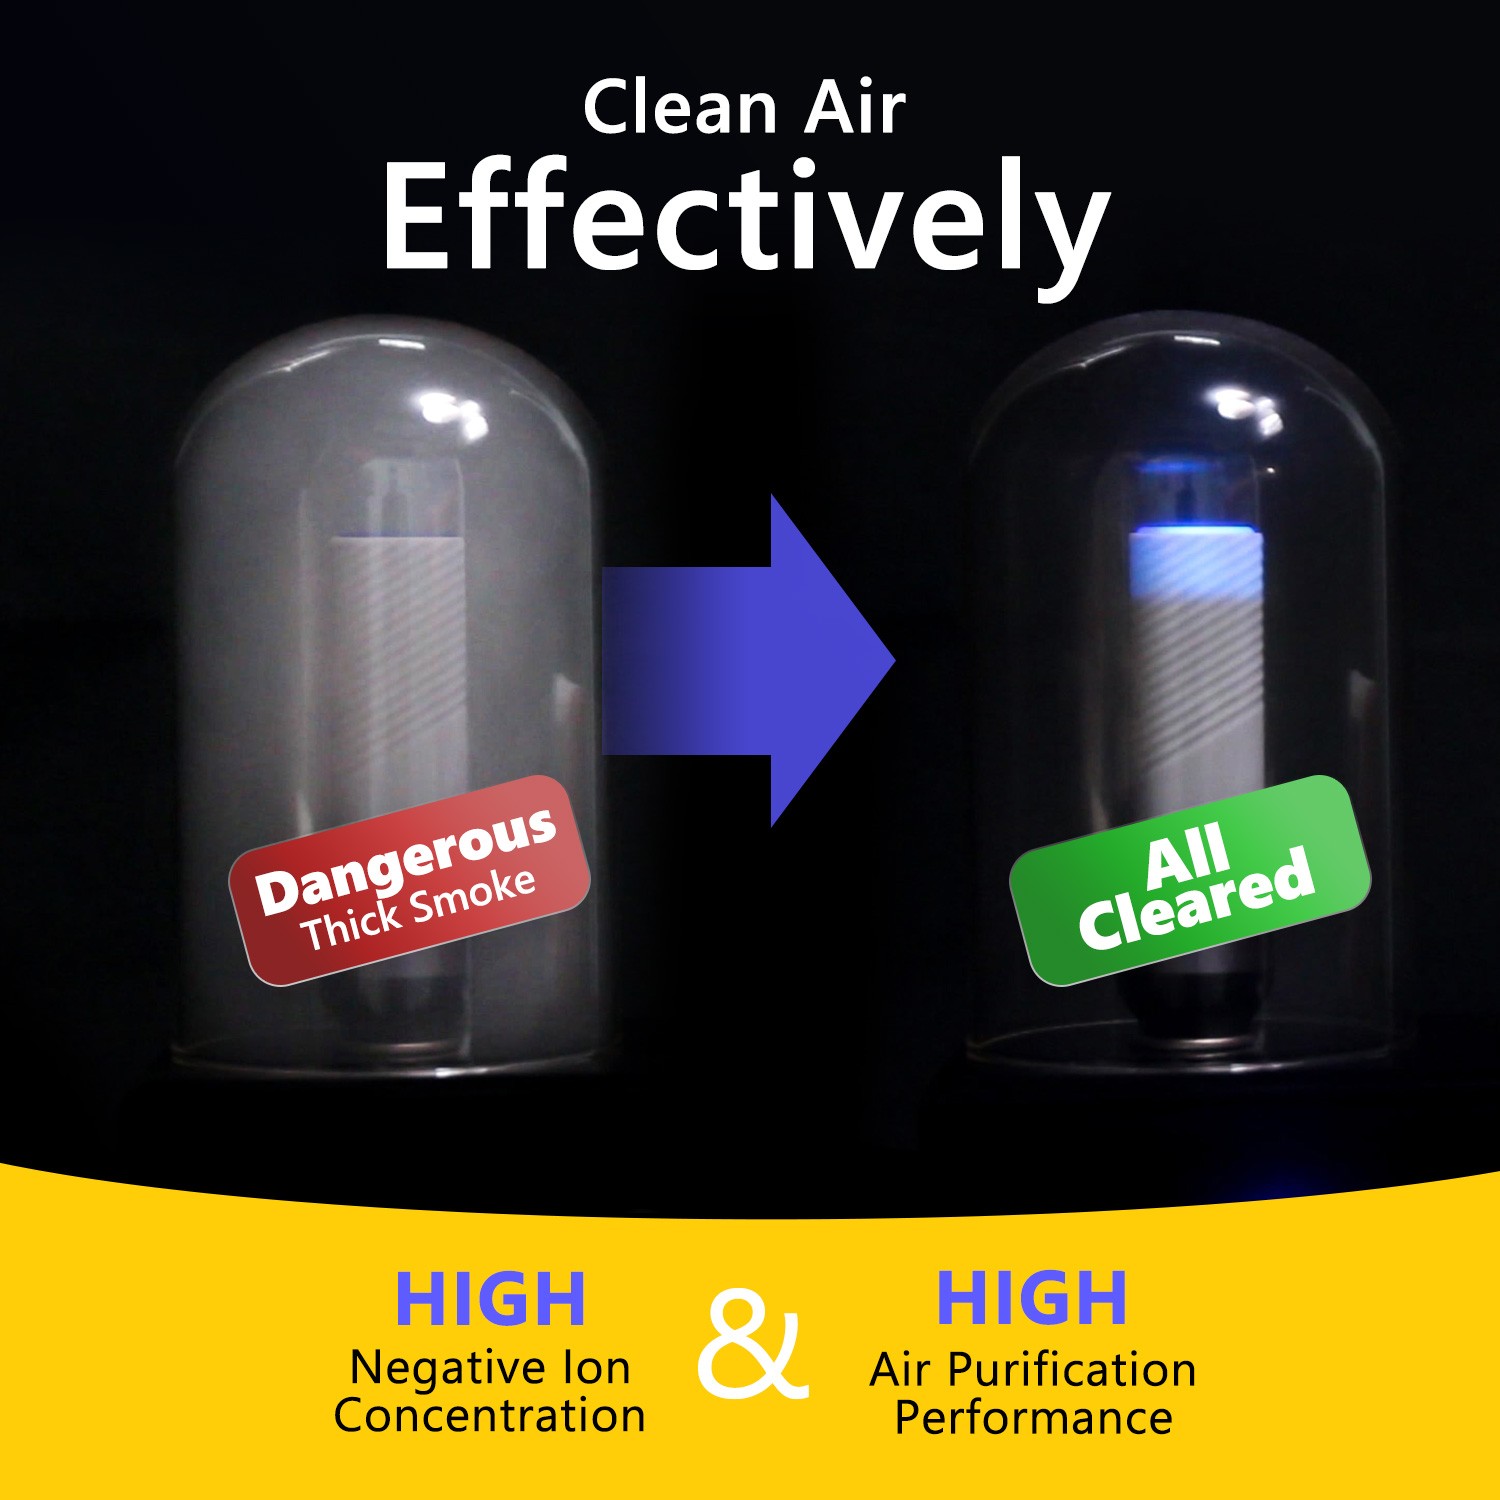 secondhand smoke removal air purifier test